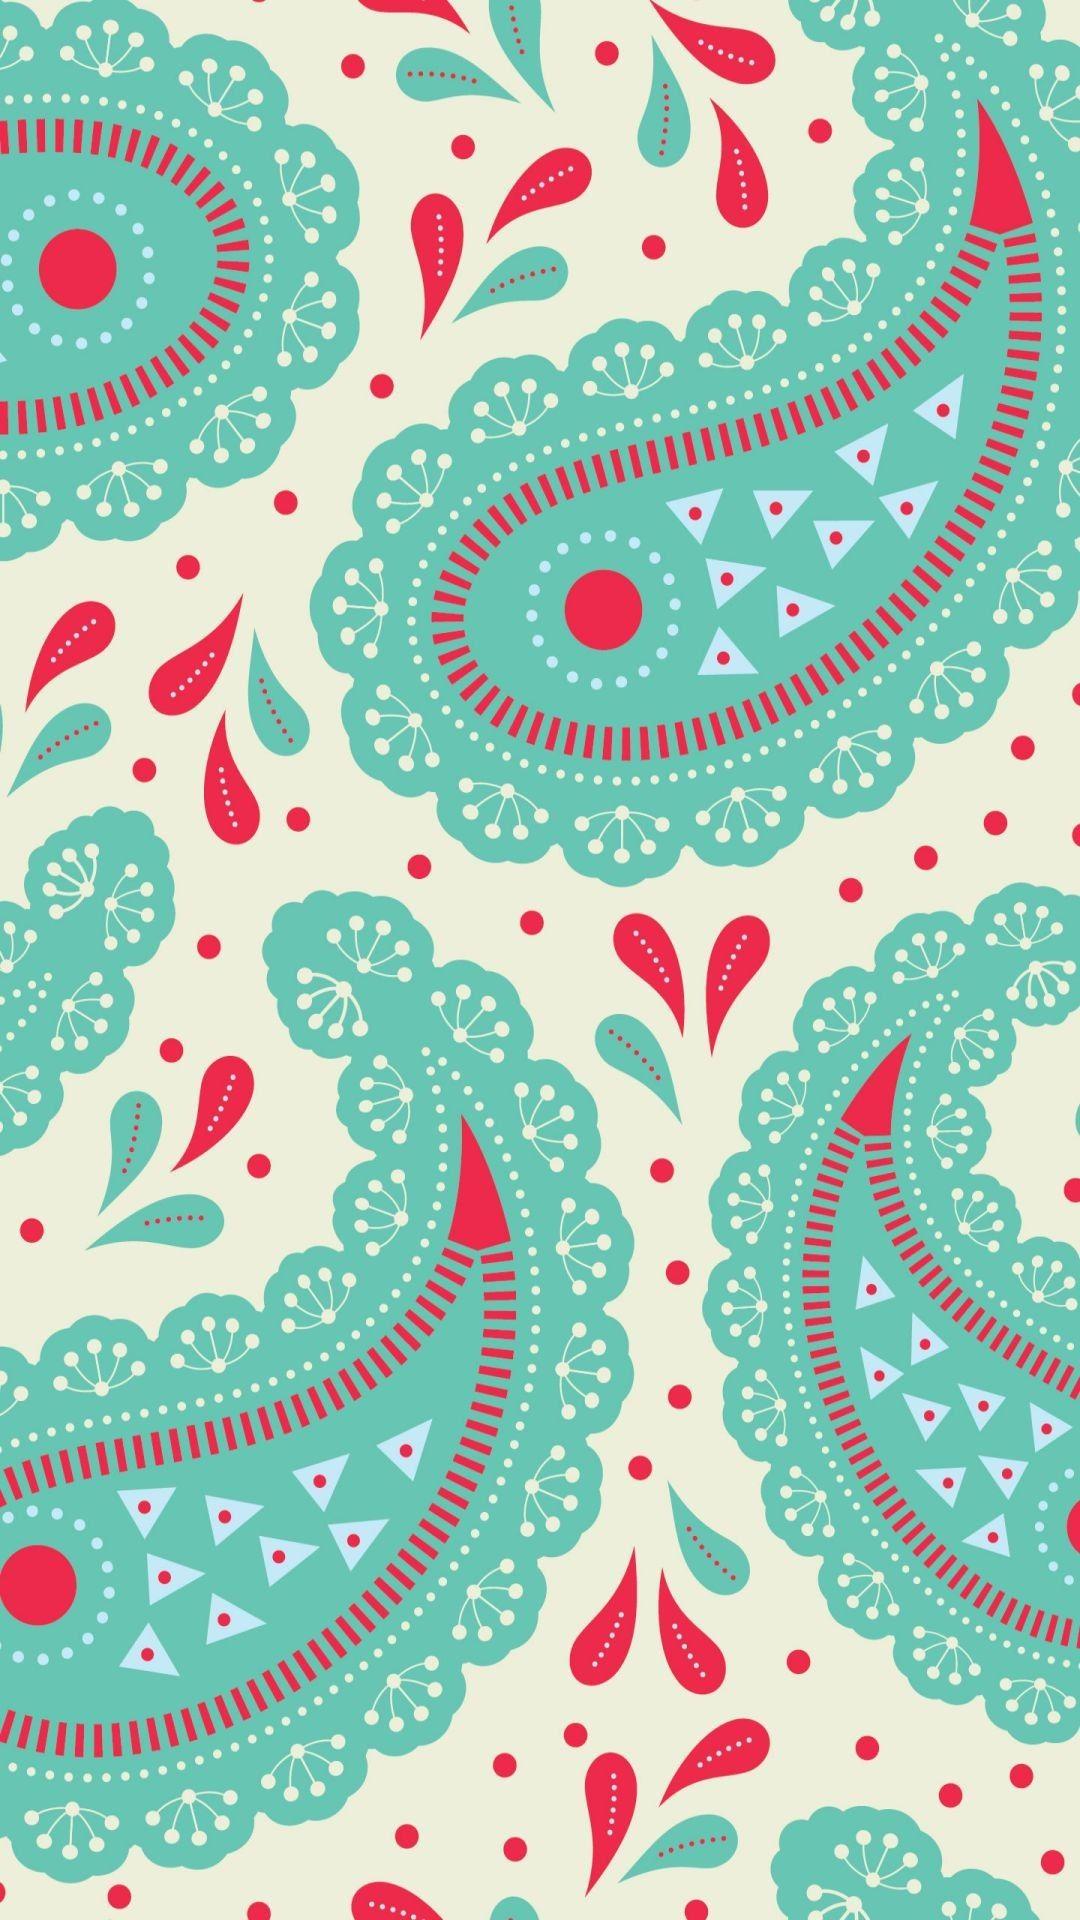 Paisley Iphone Wallpapers Top Free Paisley Iphone Backgrounds Wallpaperaccess 8765